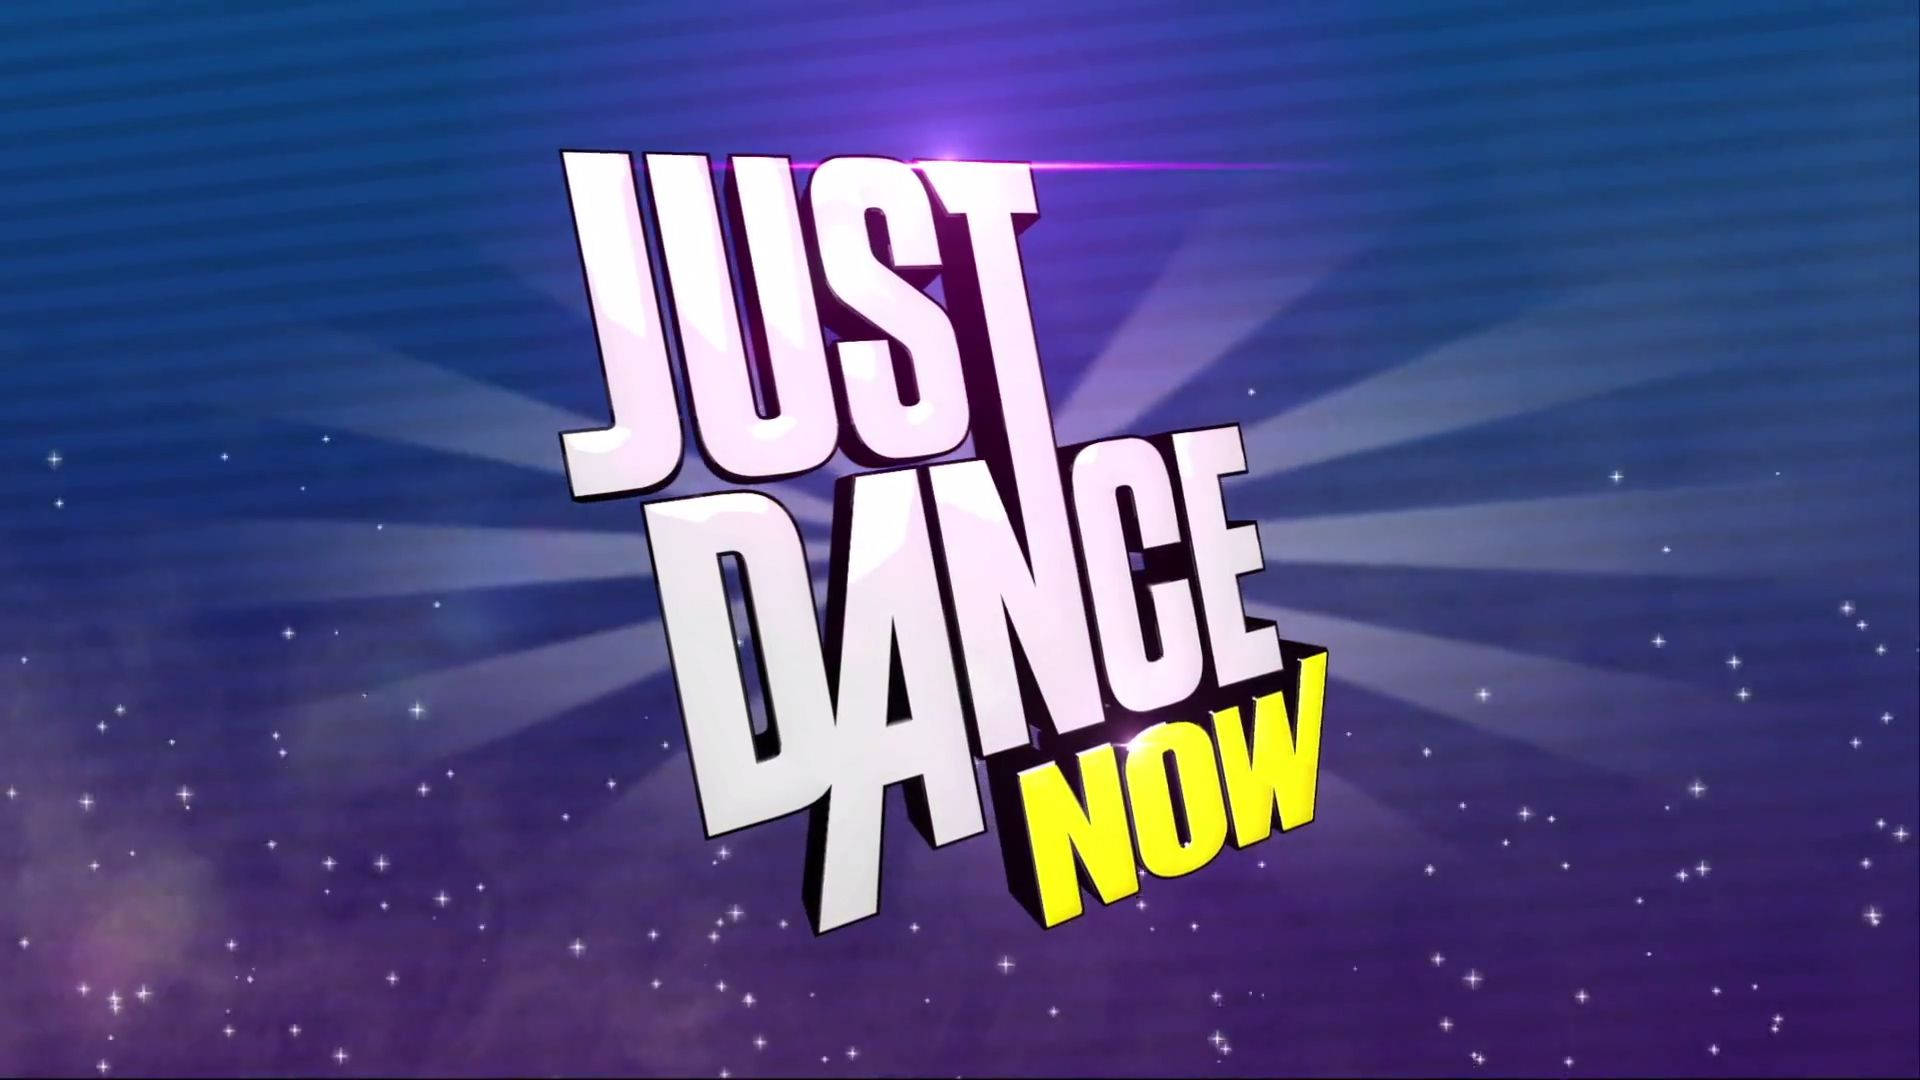 Just Dance Now Poster Background